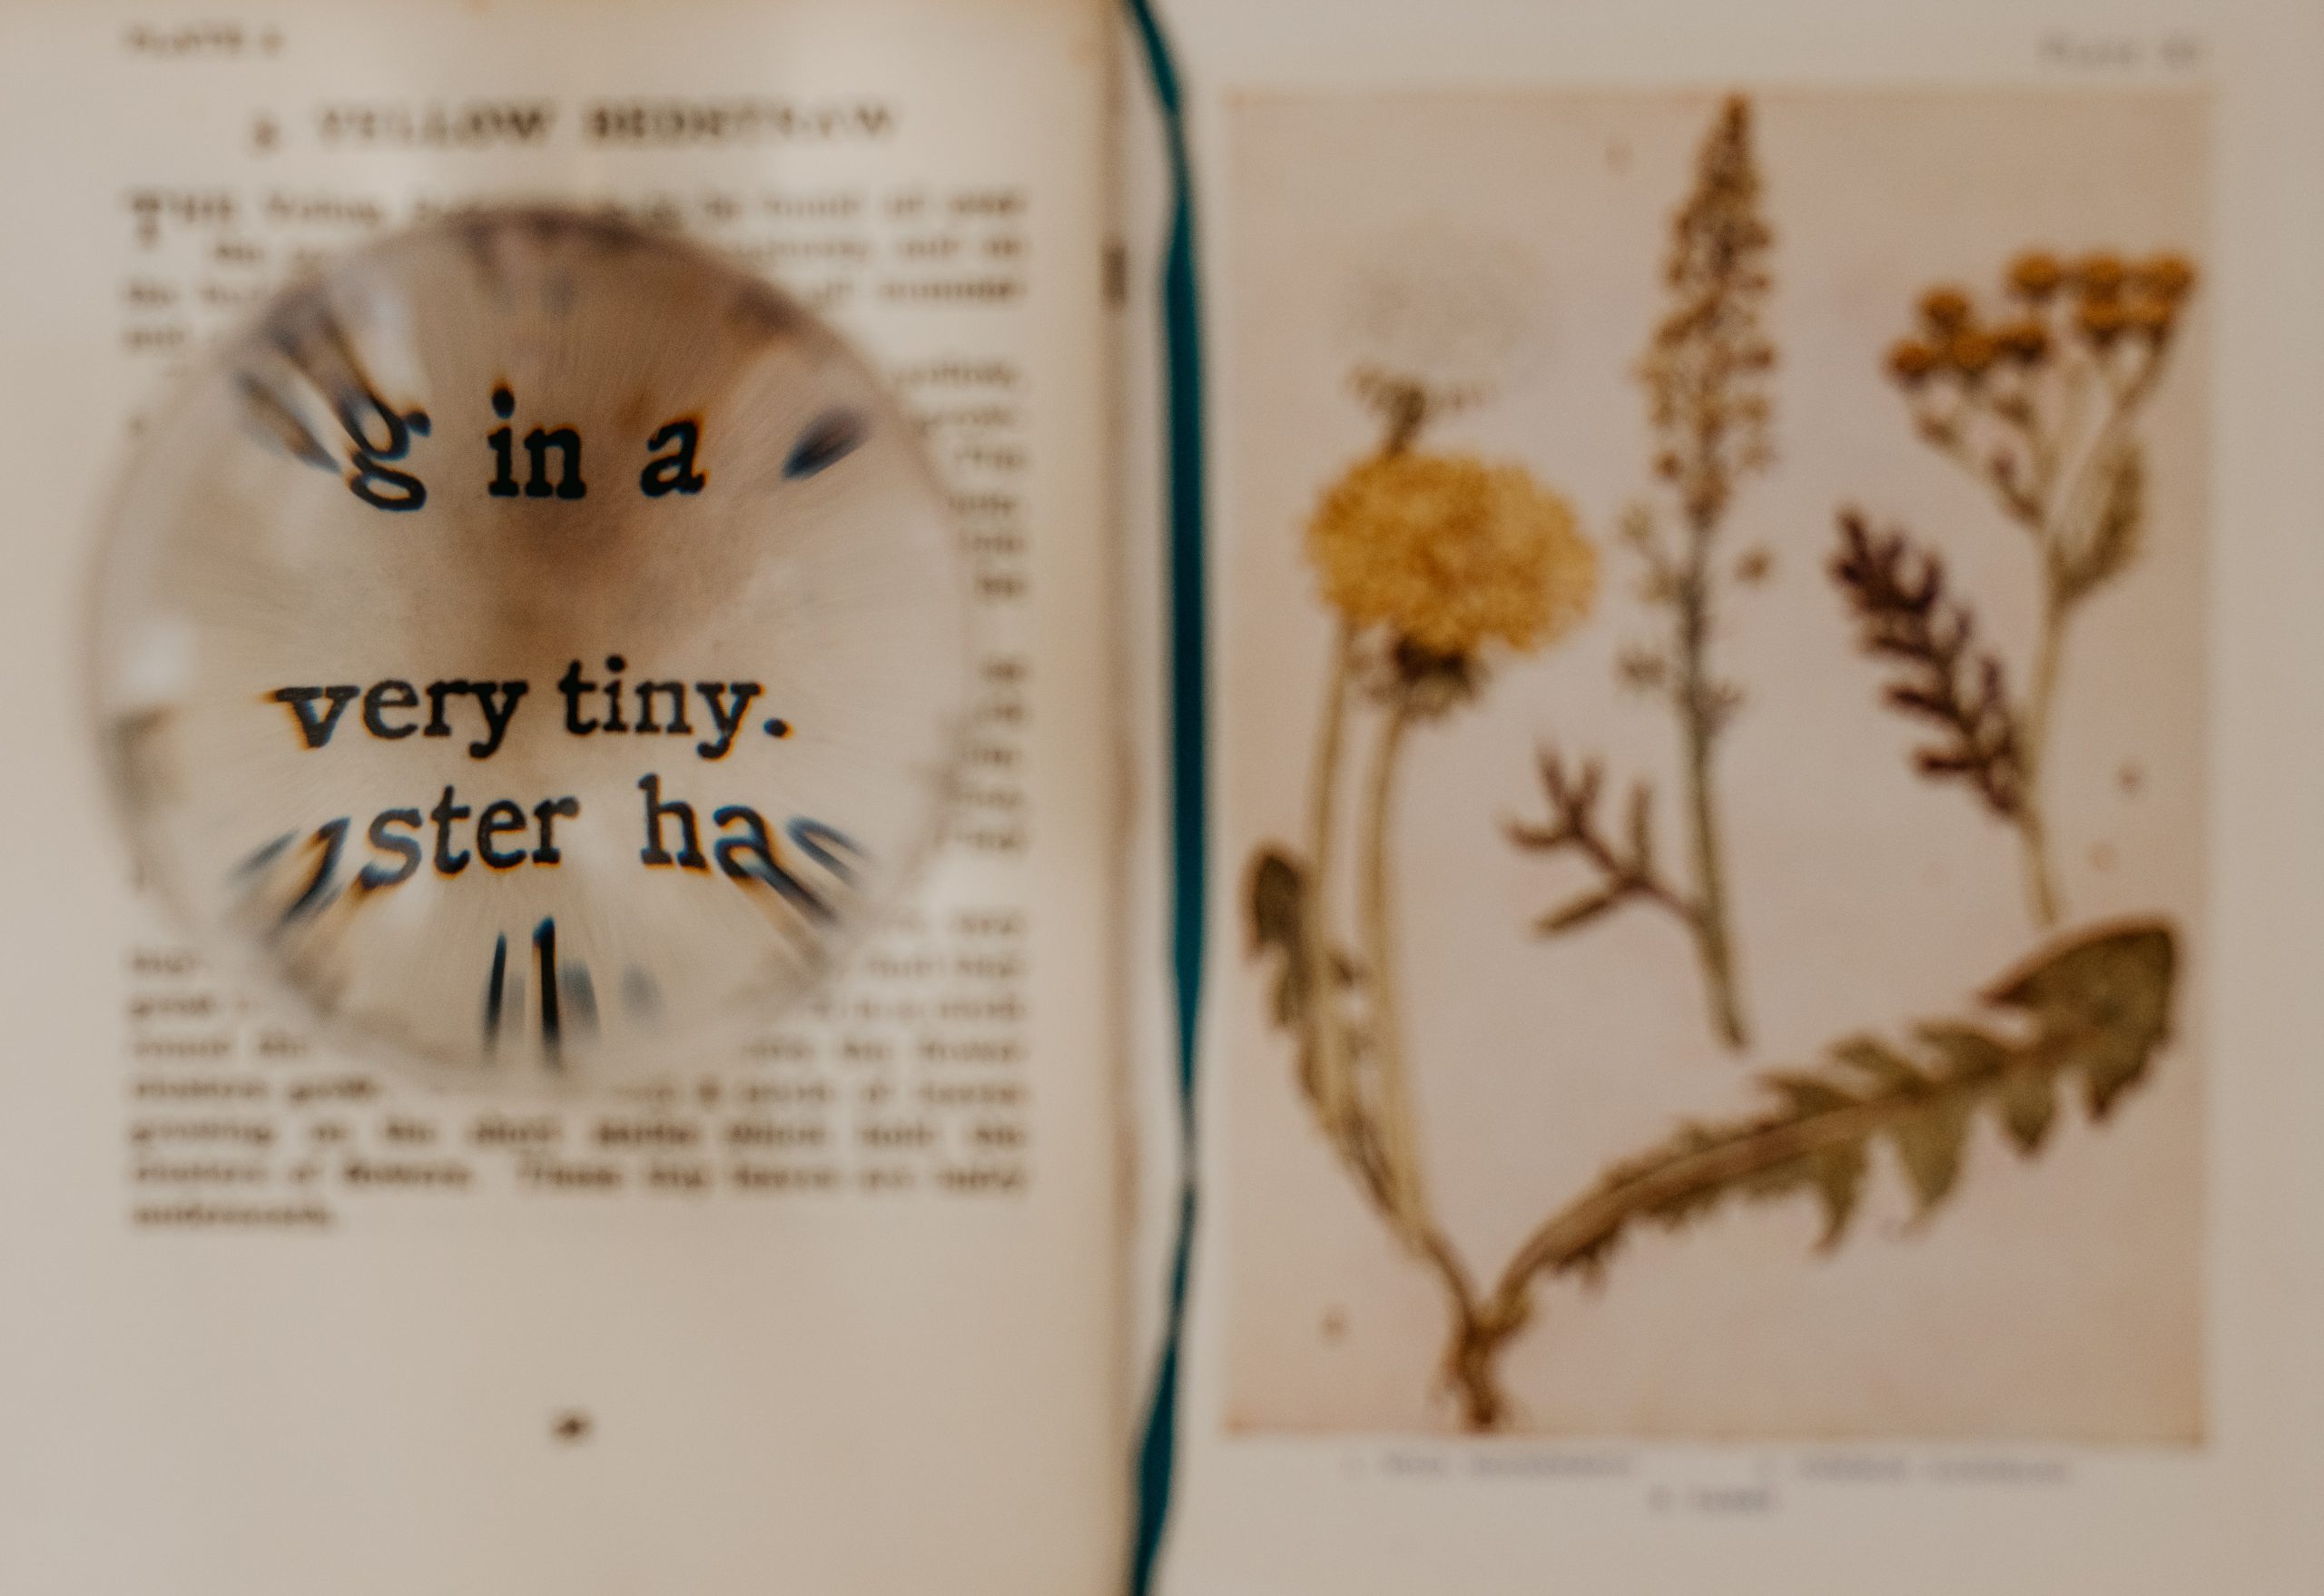 Image of a magnifying glass held over an open page in a book causing the words "very tiny" to appear larger than the rest of the test. Opposite page of book features sketches of wild flowers.